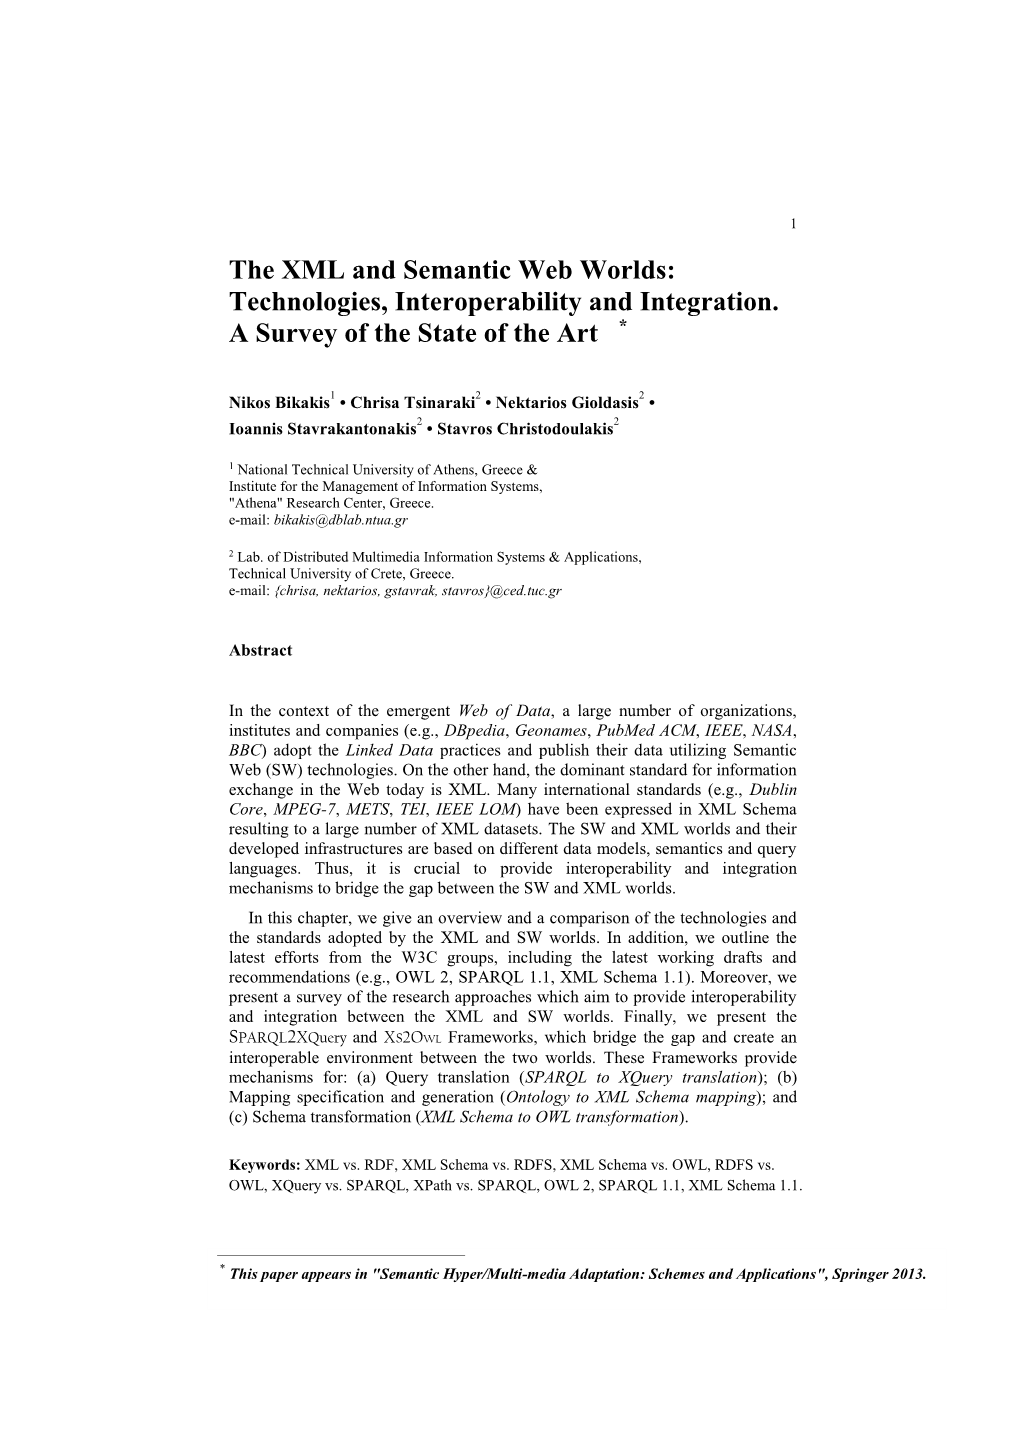 The XML and Semantic Web Worlds: Technologies, Interoperability and Integration